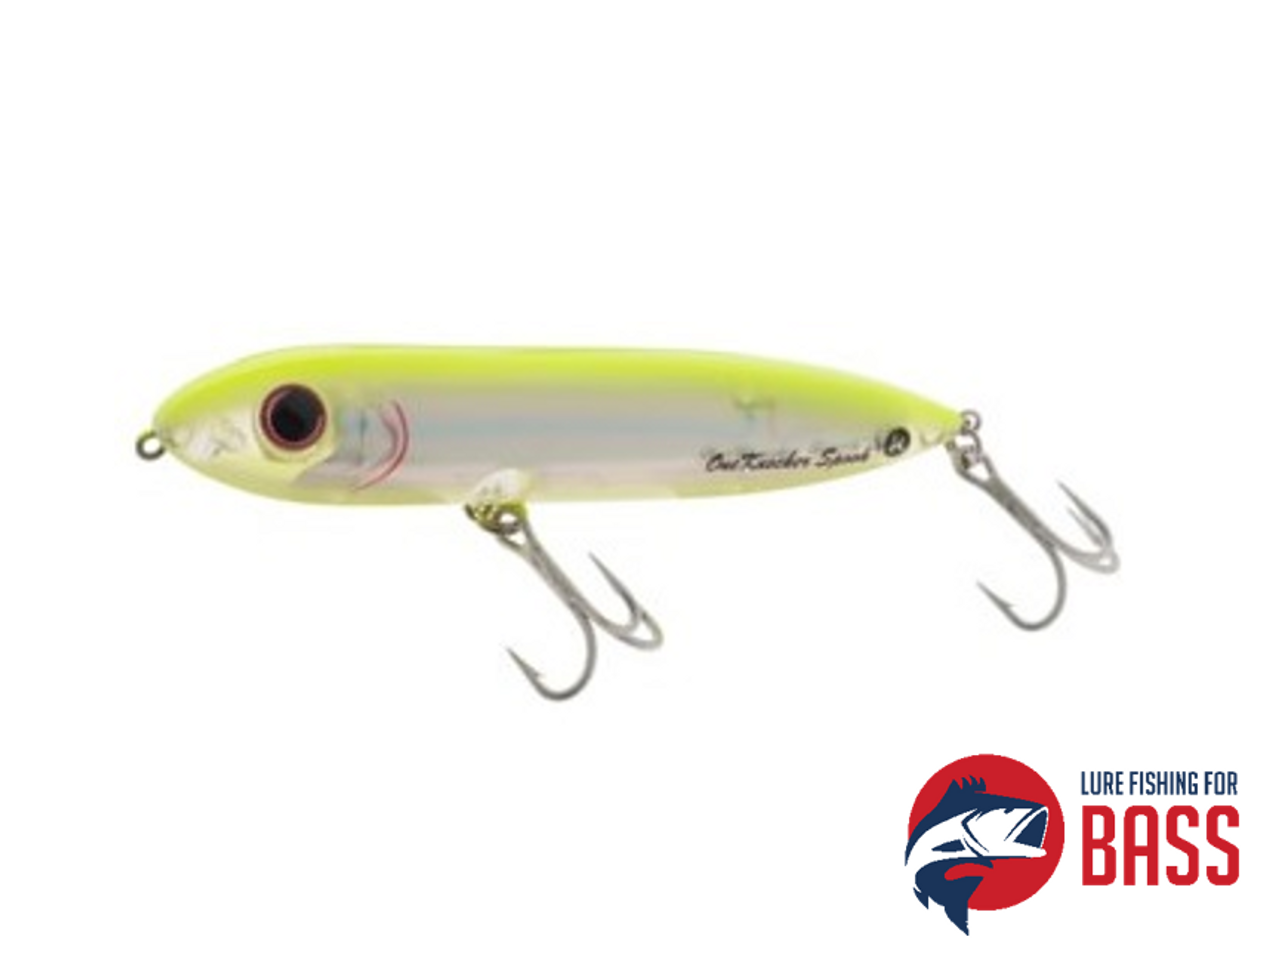 https://cdn11.bigcommerce.com/s-h9hha4a/images/stencil/1280x1280/products/4914/16177/Heddon_One_Knocker_Spook_21g_Charteruse_Silver_Lure__44647.1559660544.png?c=2